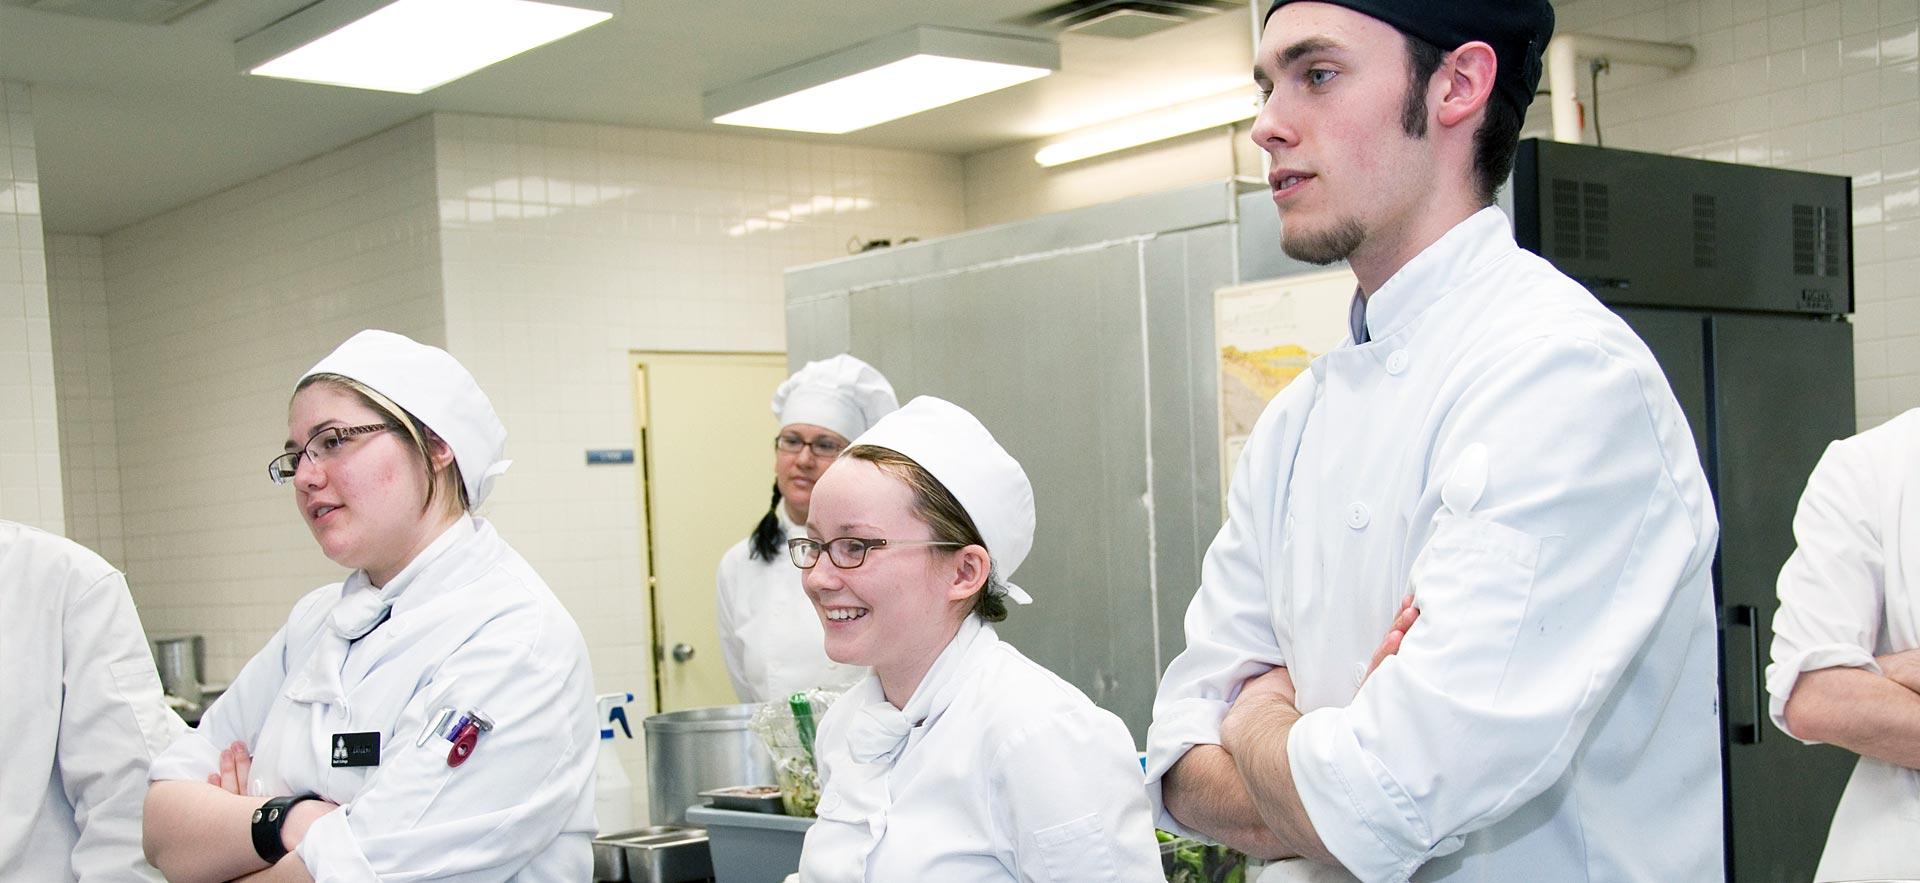 A group of culinary students listen to their instructor in one the Sault College culinary kitchens.